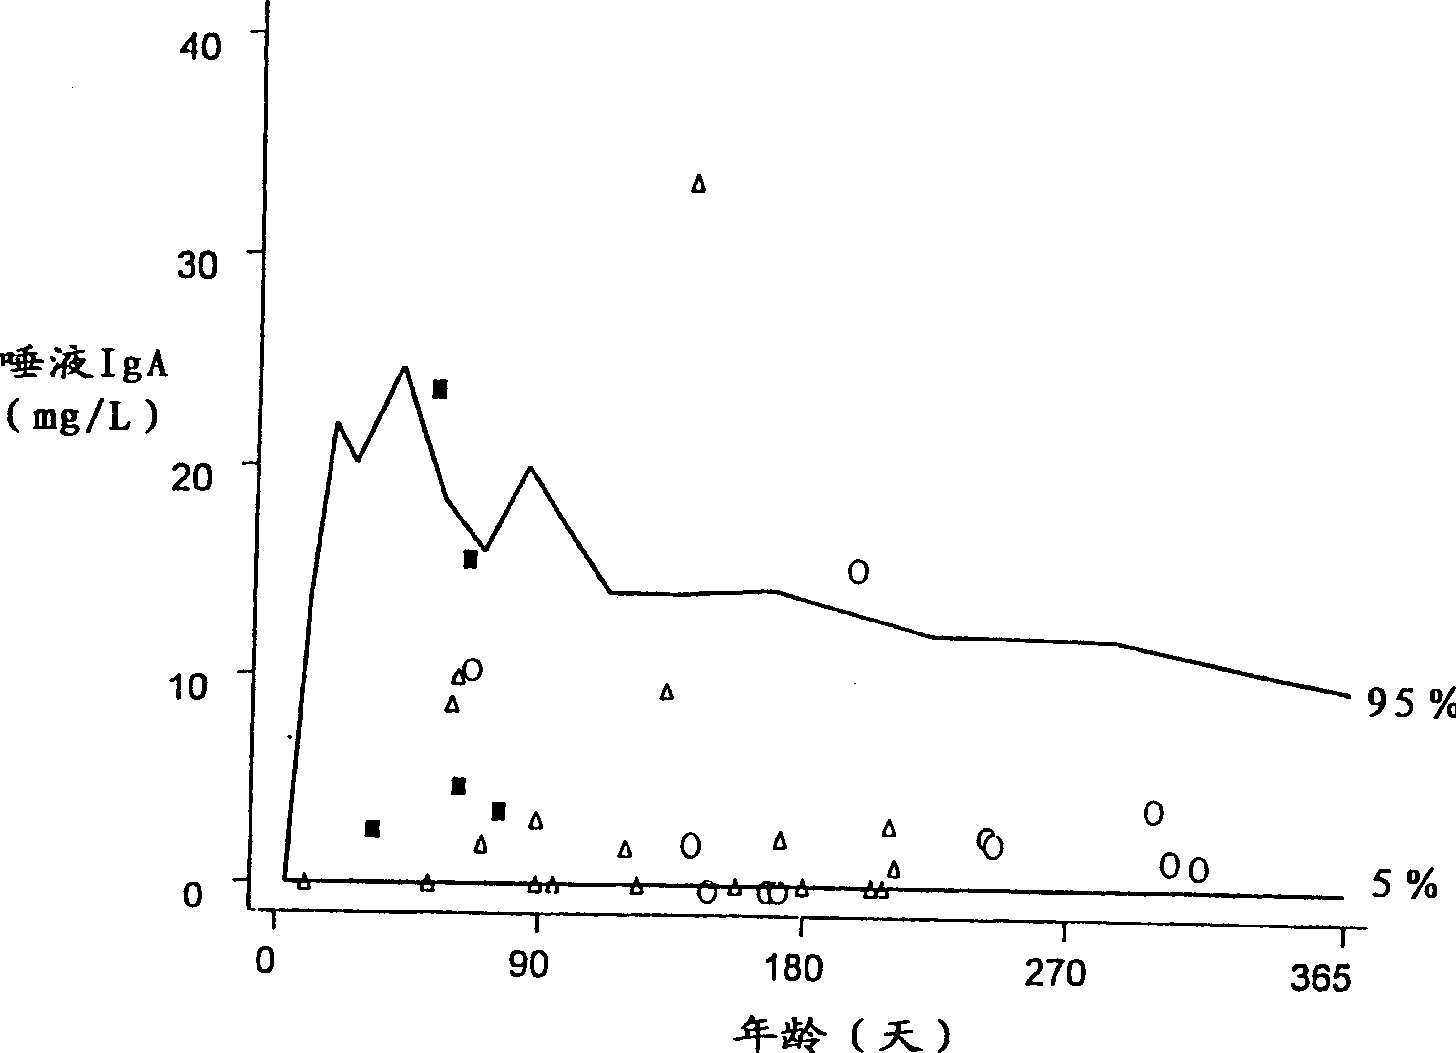 Method of determining potential susceptibility to development of ALTE and/or SIDS